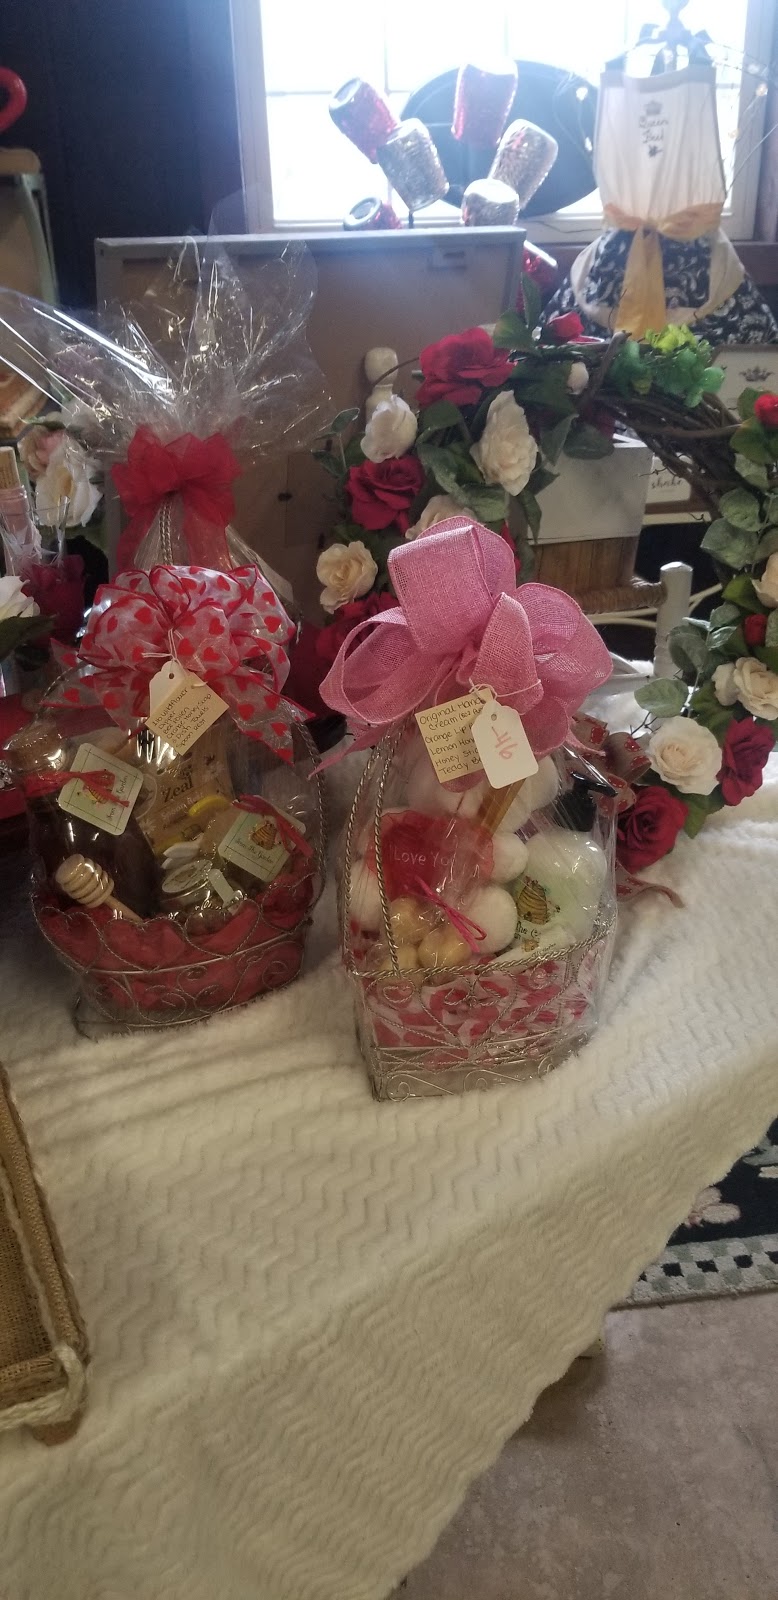 From the Garden Gift Shop | 353 Fairfield Rd, Freehold, NJ 07728 | Phone: (732) 866-1745